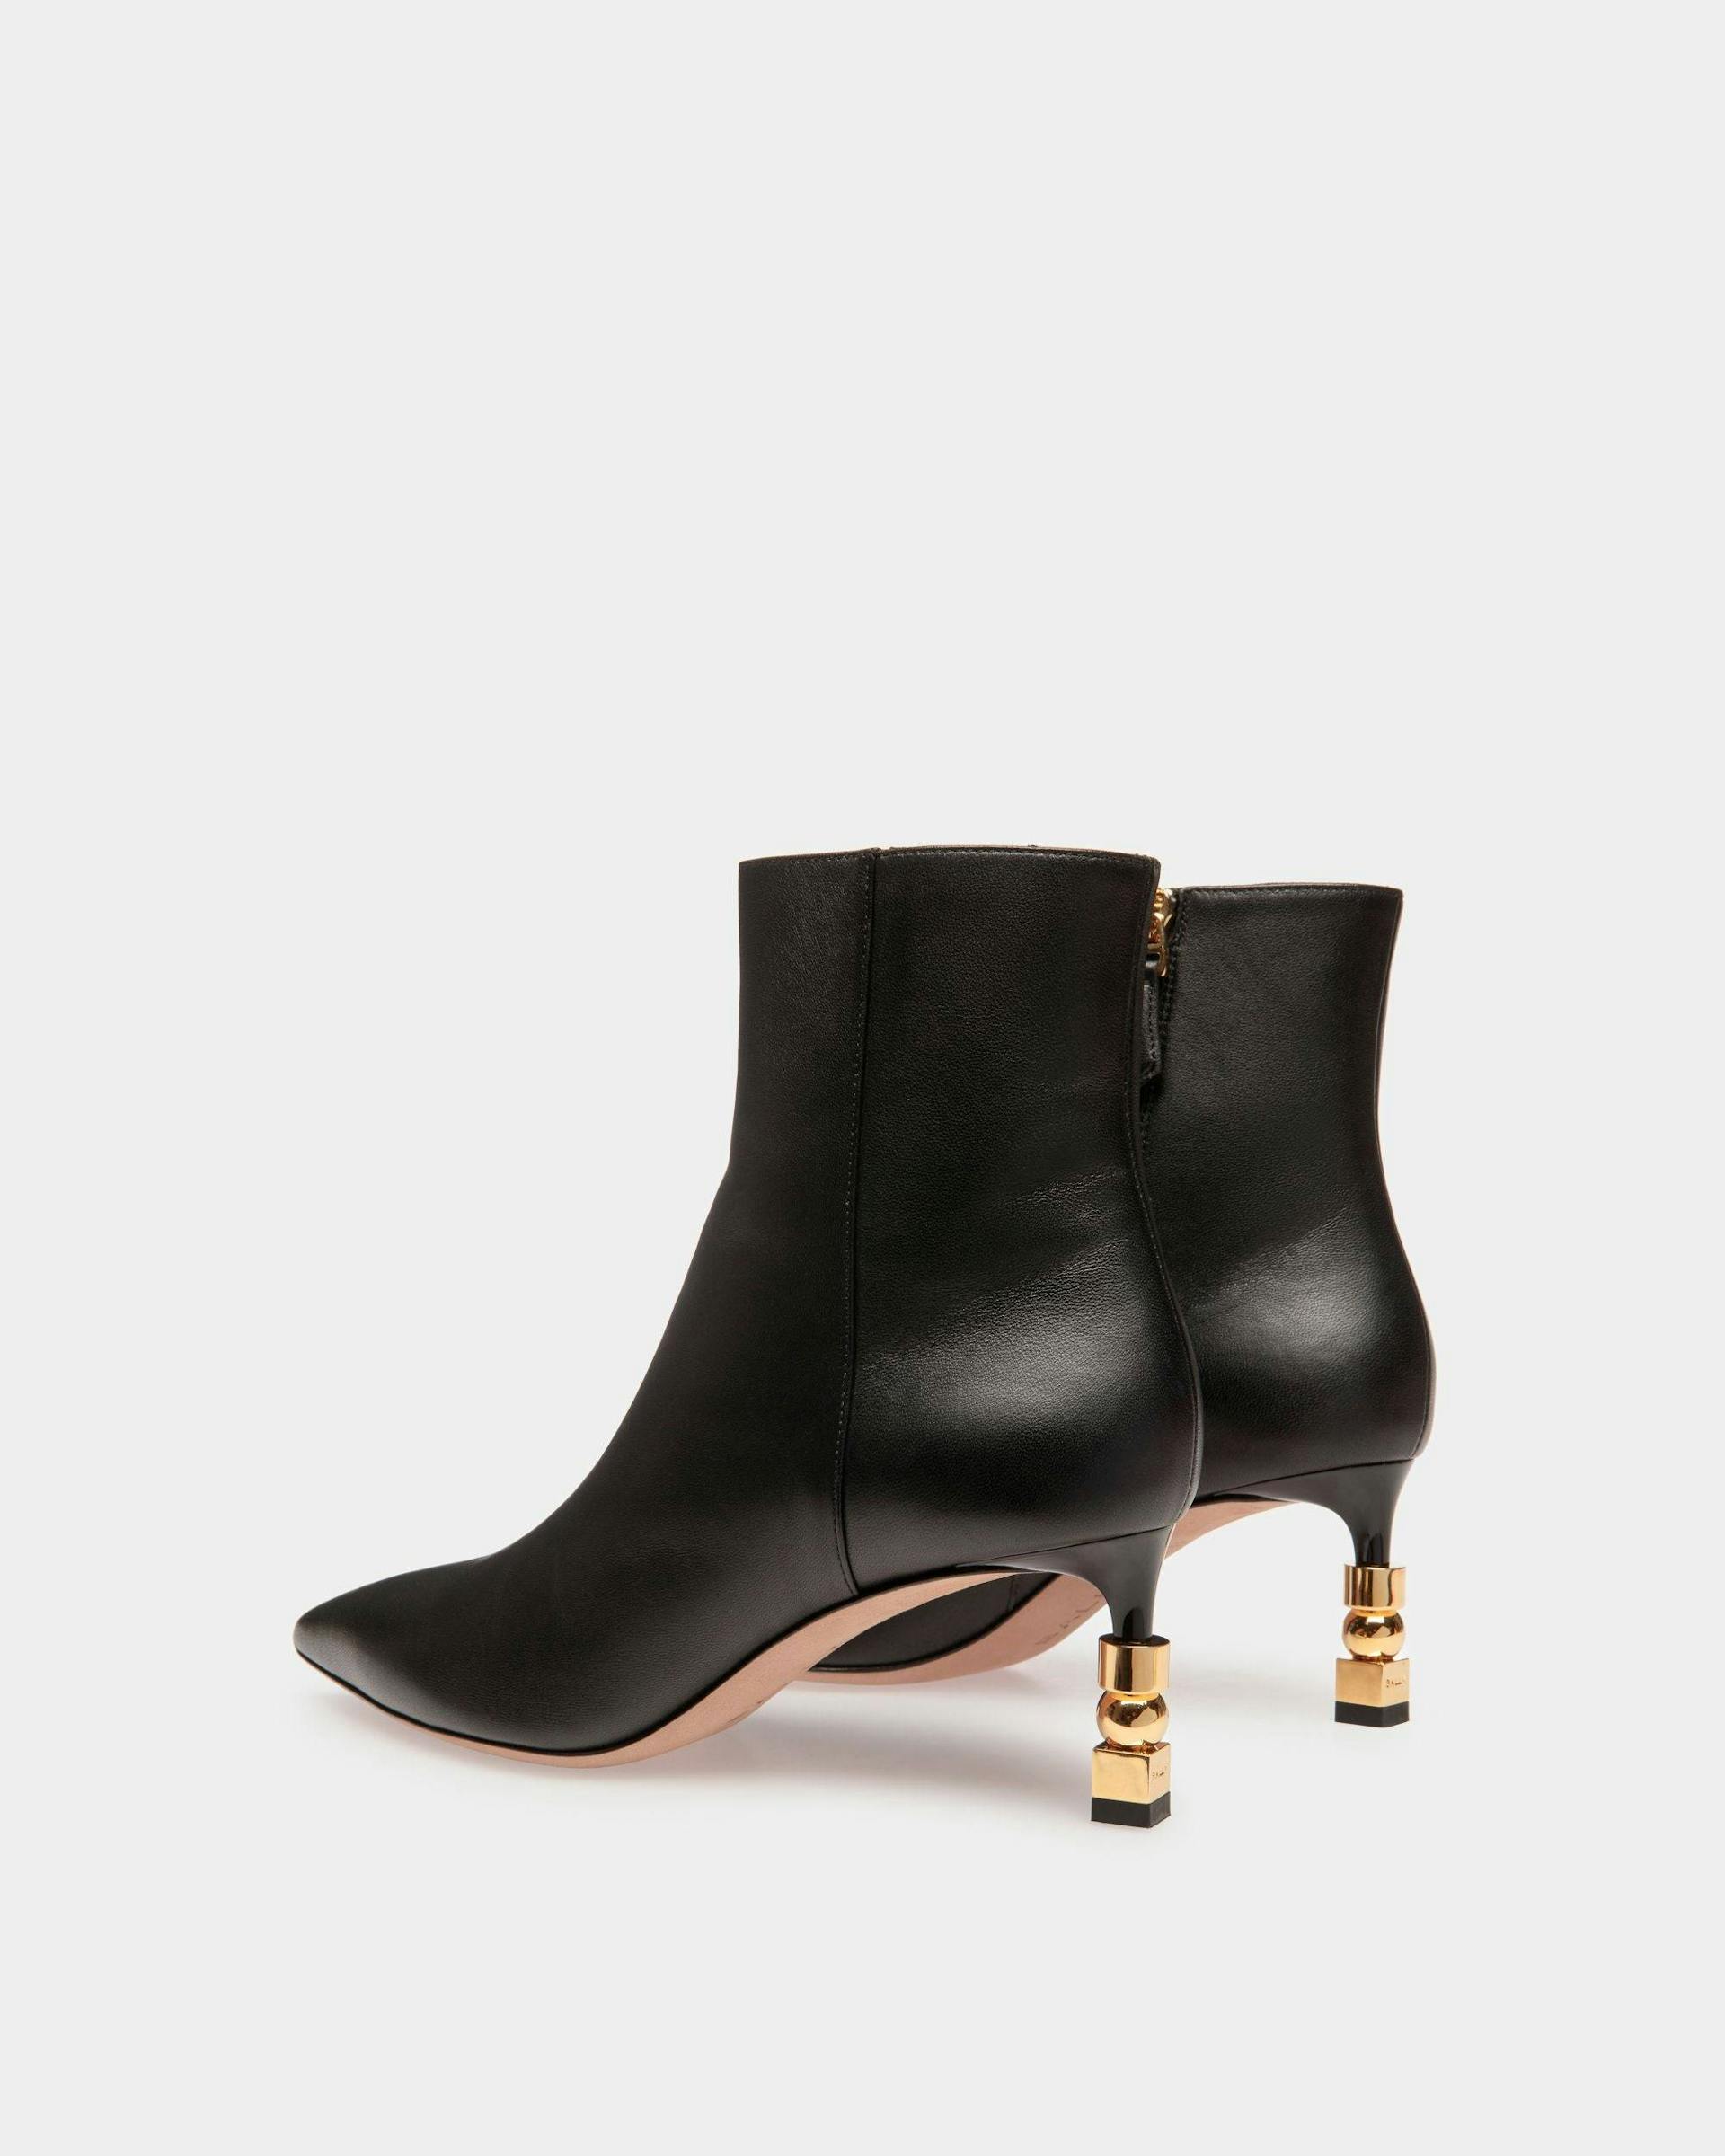 Women's Block Booties In Black Leather | Bally | Still Life 3/4 Back